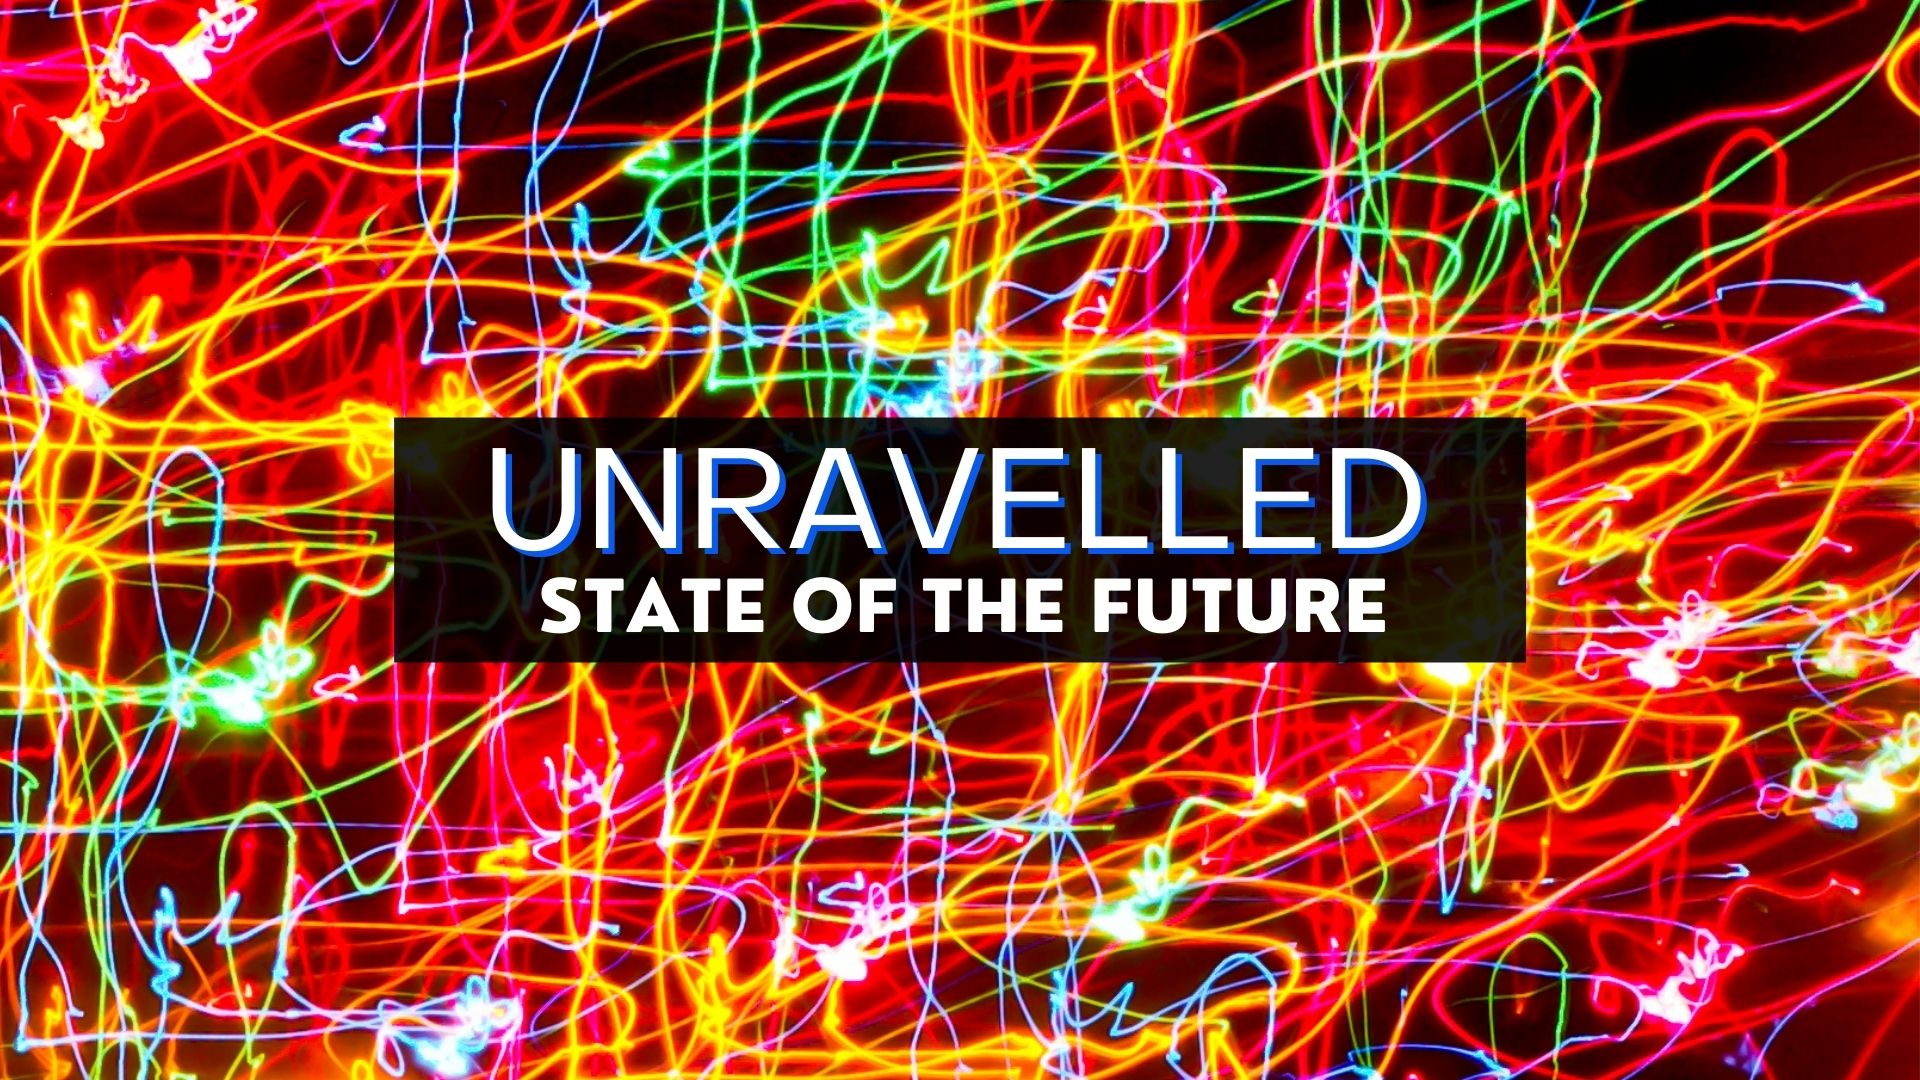 Unraveled: State of the Future Final (1920 × 1080 px)